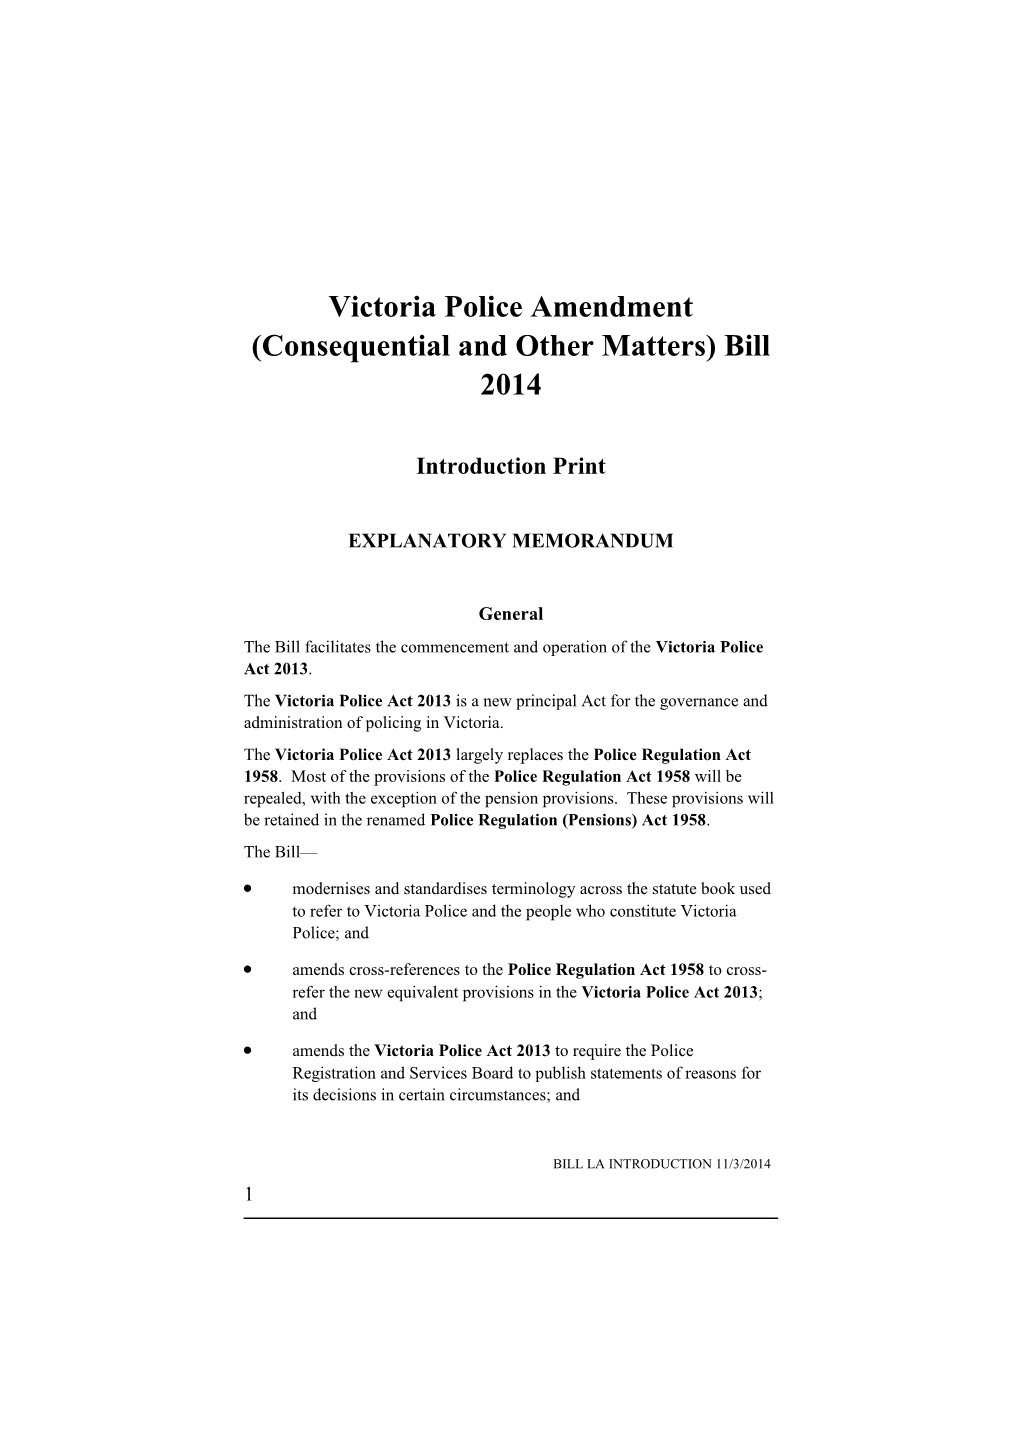 Victoria Police Amendment (Consequential and Other Matters) Bill 2014